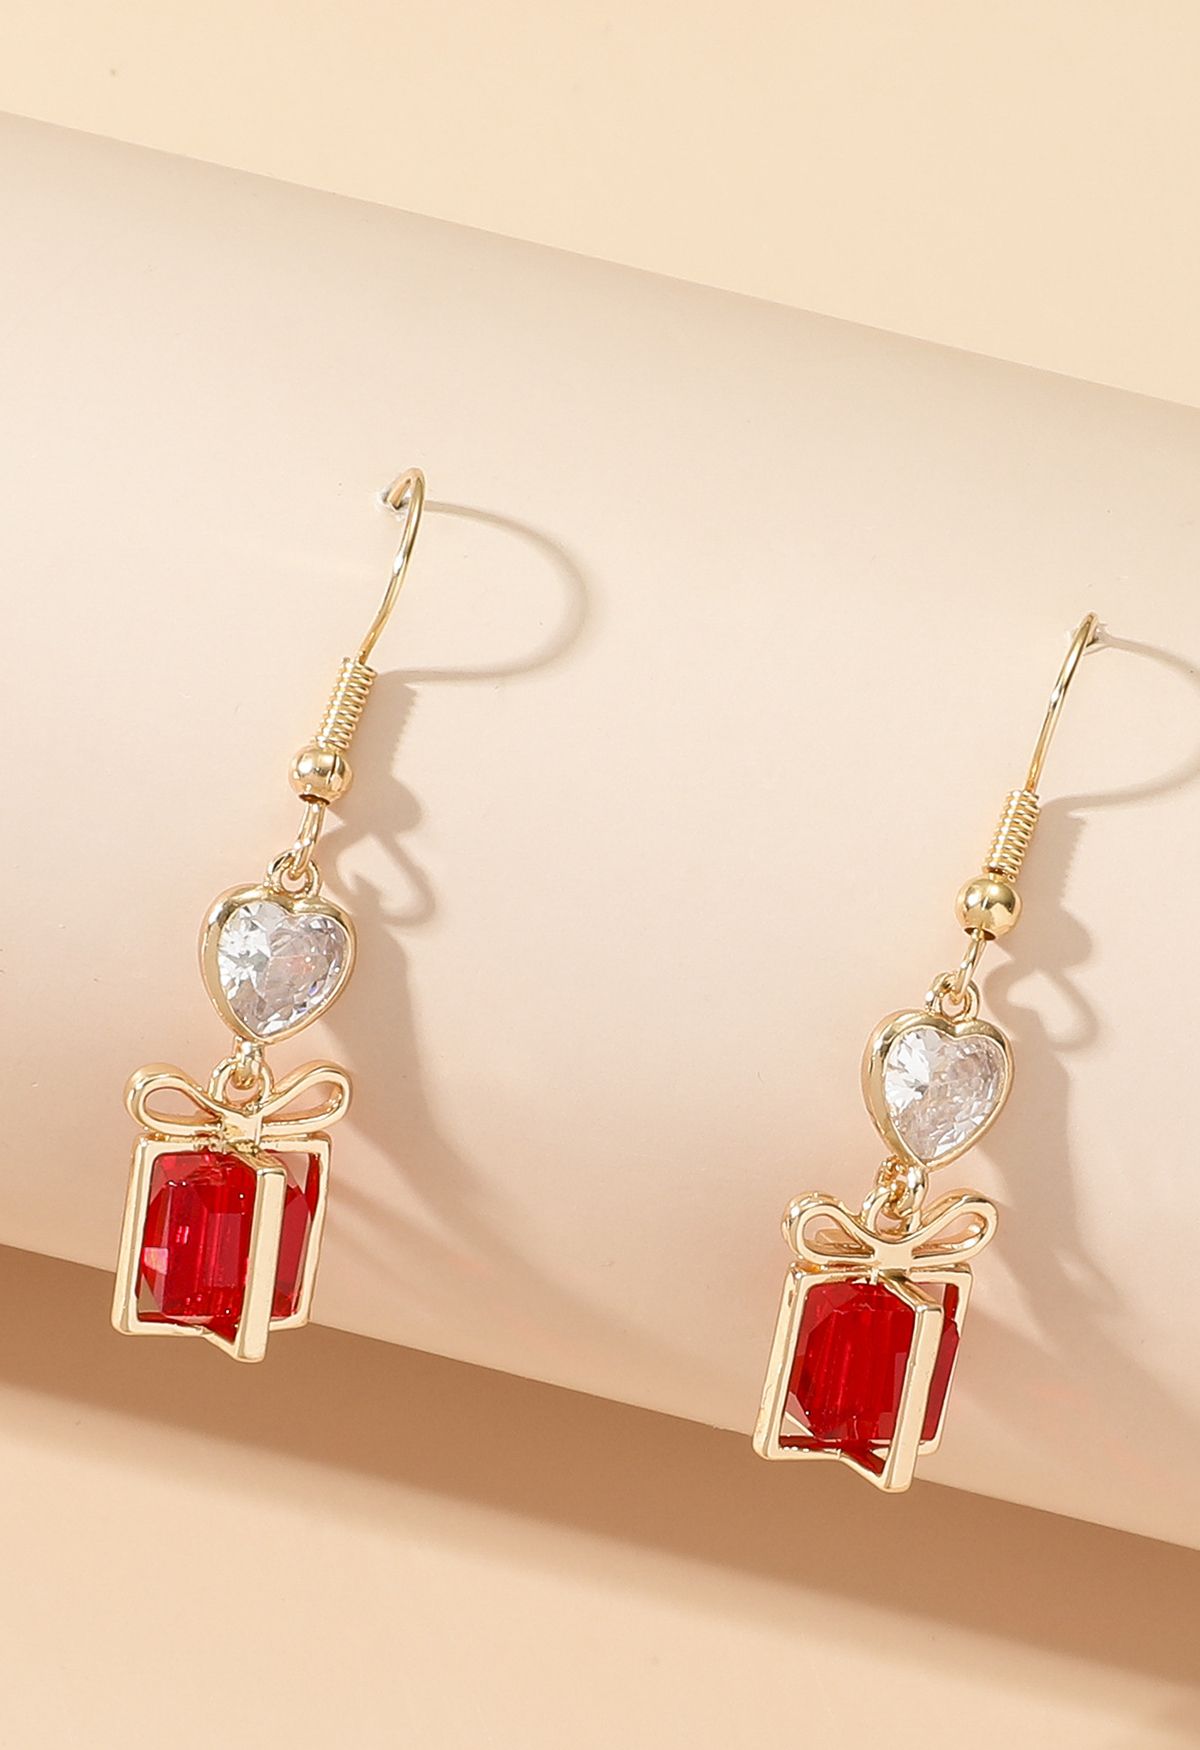 Gold Trim Red Crystal Gift Box Earrings